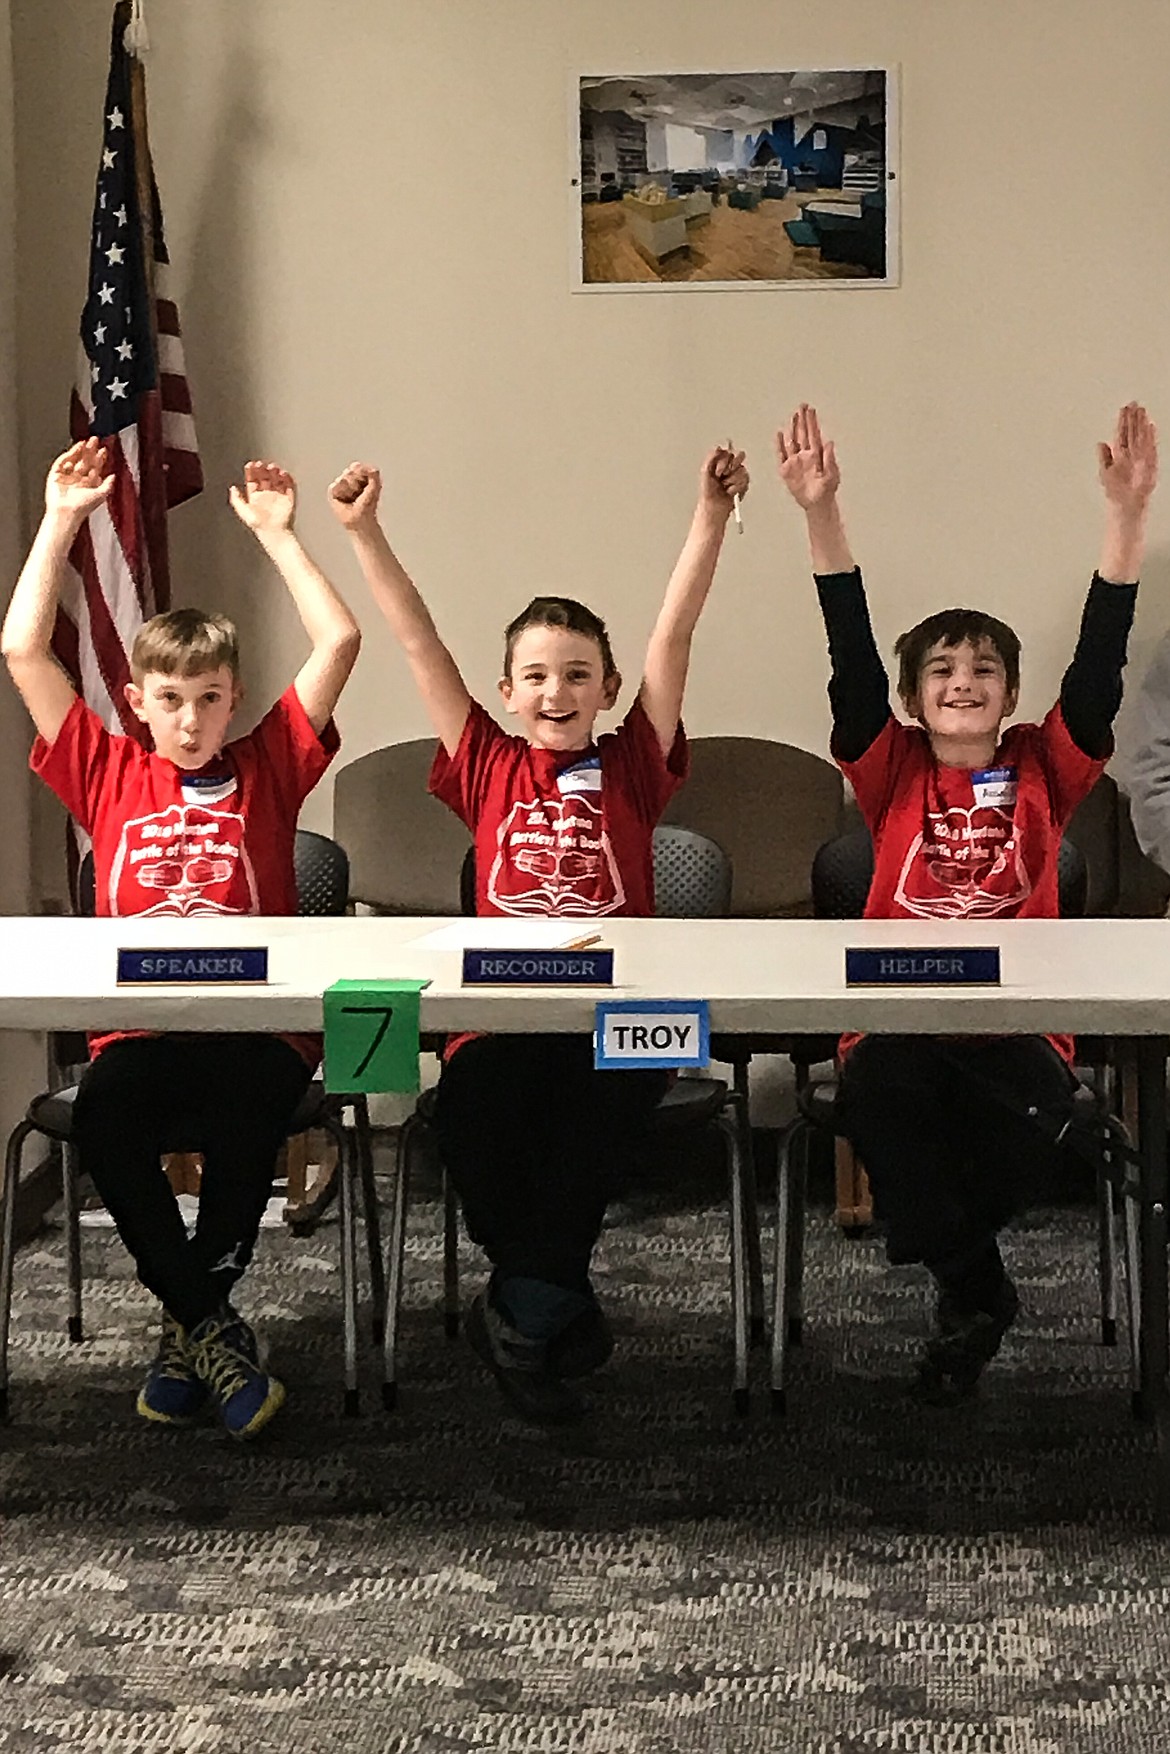 Troy Public Schools 3rd-4th grade team of Dimitri Walenter, Elijah Garcia and Anson Goucher placed fifth of seven teams during the first Montana Battle of the Books. (Ben Kibbey/The Western News)